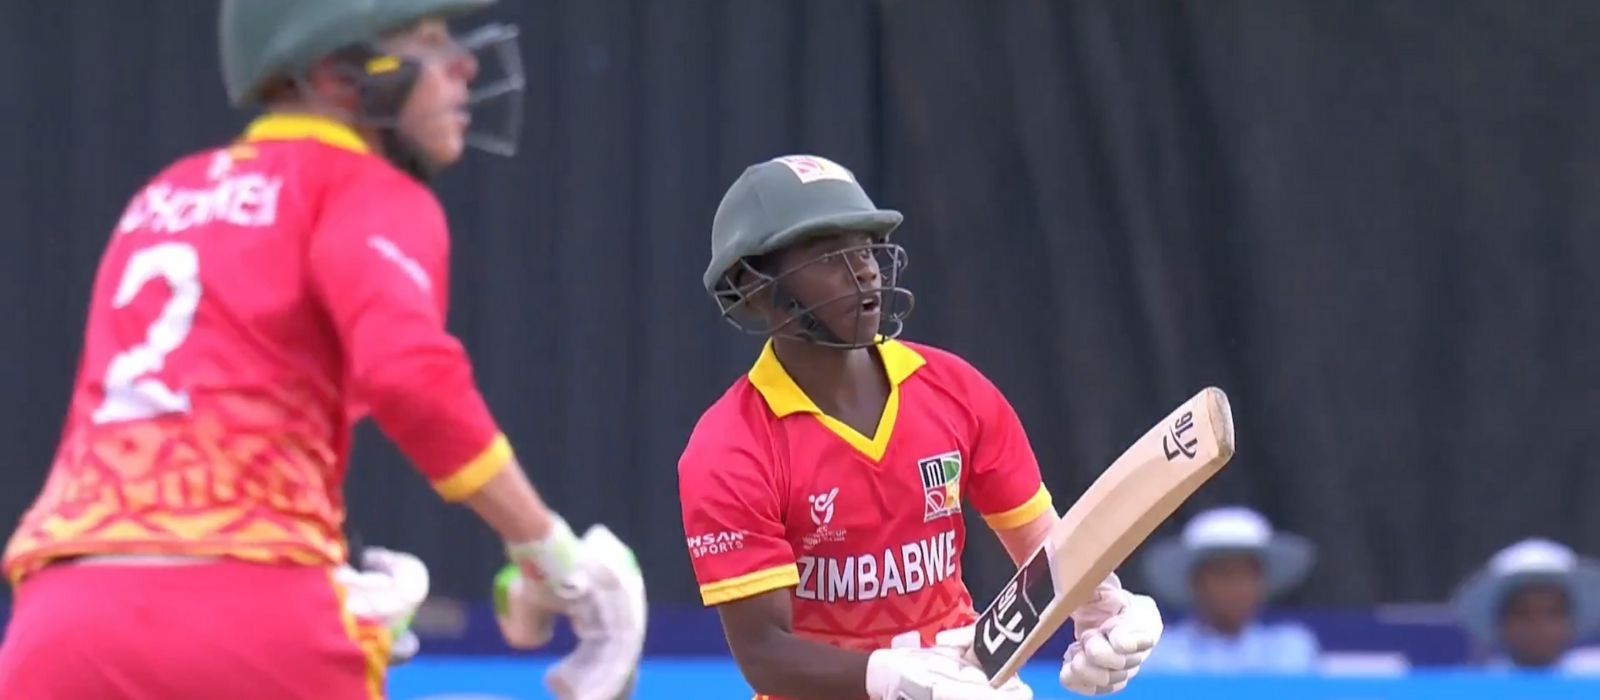 Bad start at the under nineteen world-cup for Zimbabwe